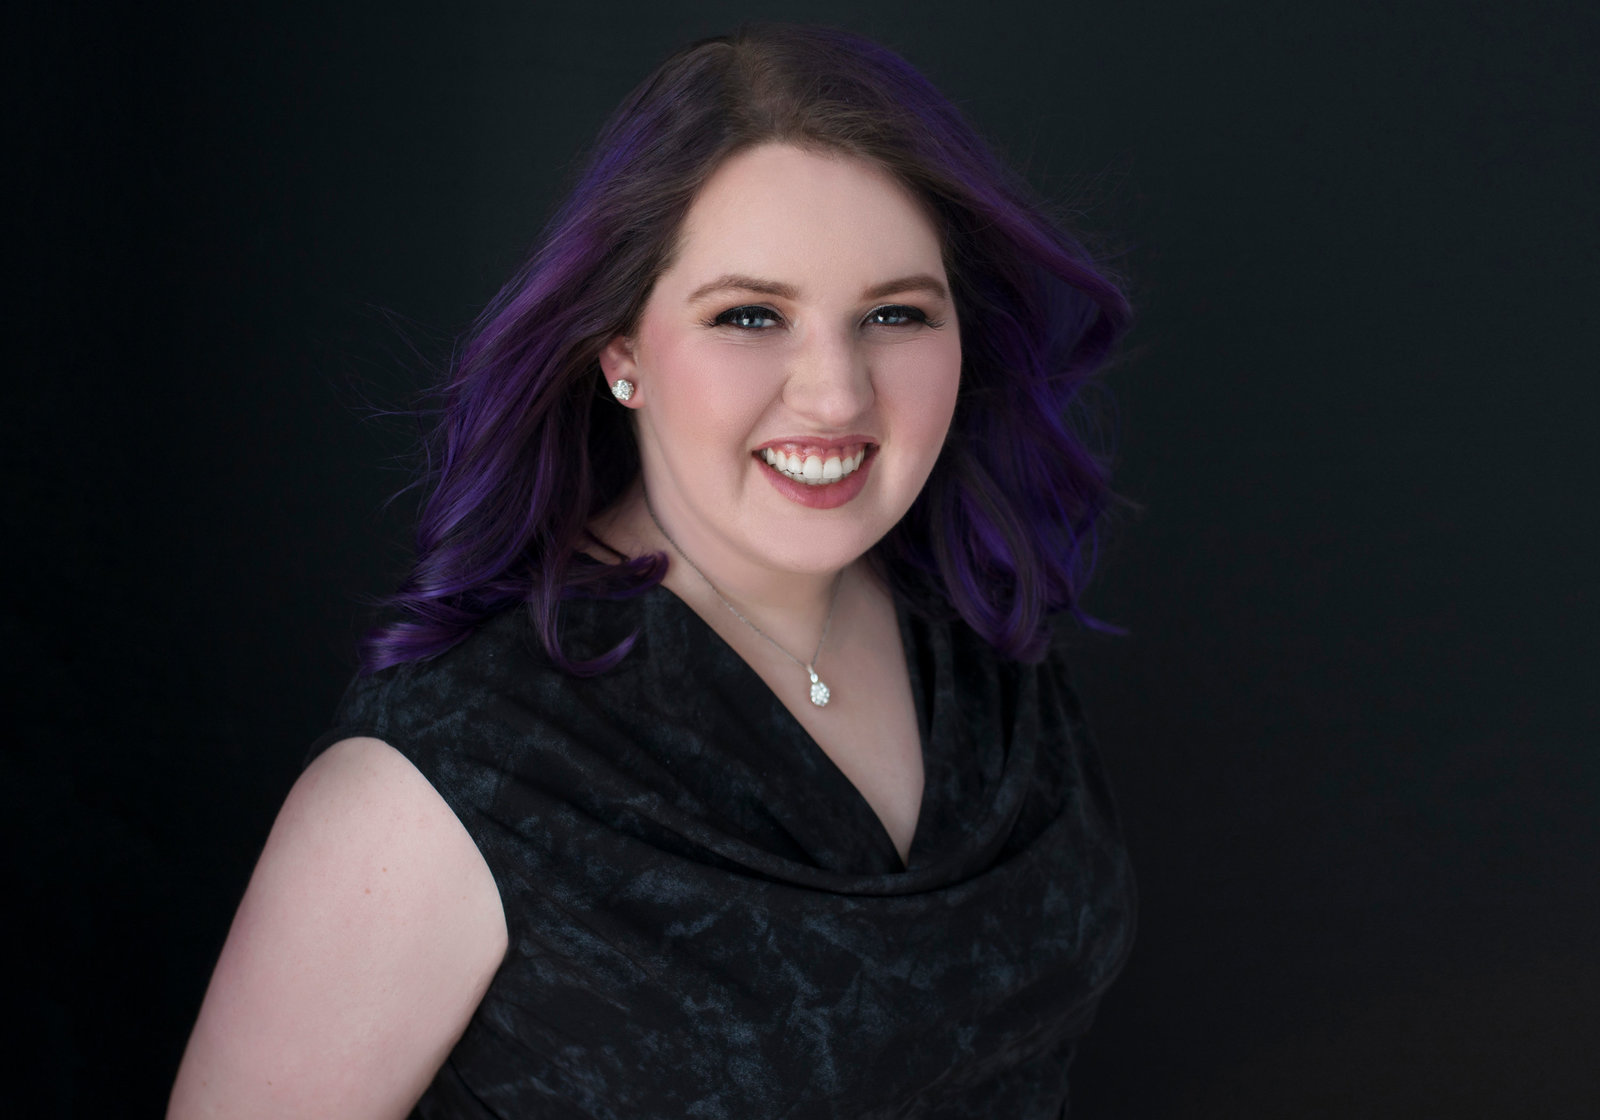 Personal branding Photo studio  of a woman smiling wearing black dress and  necklace and  purple color hair